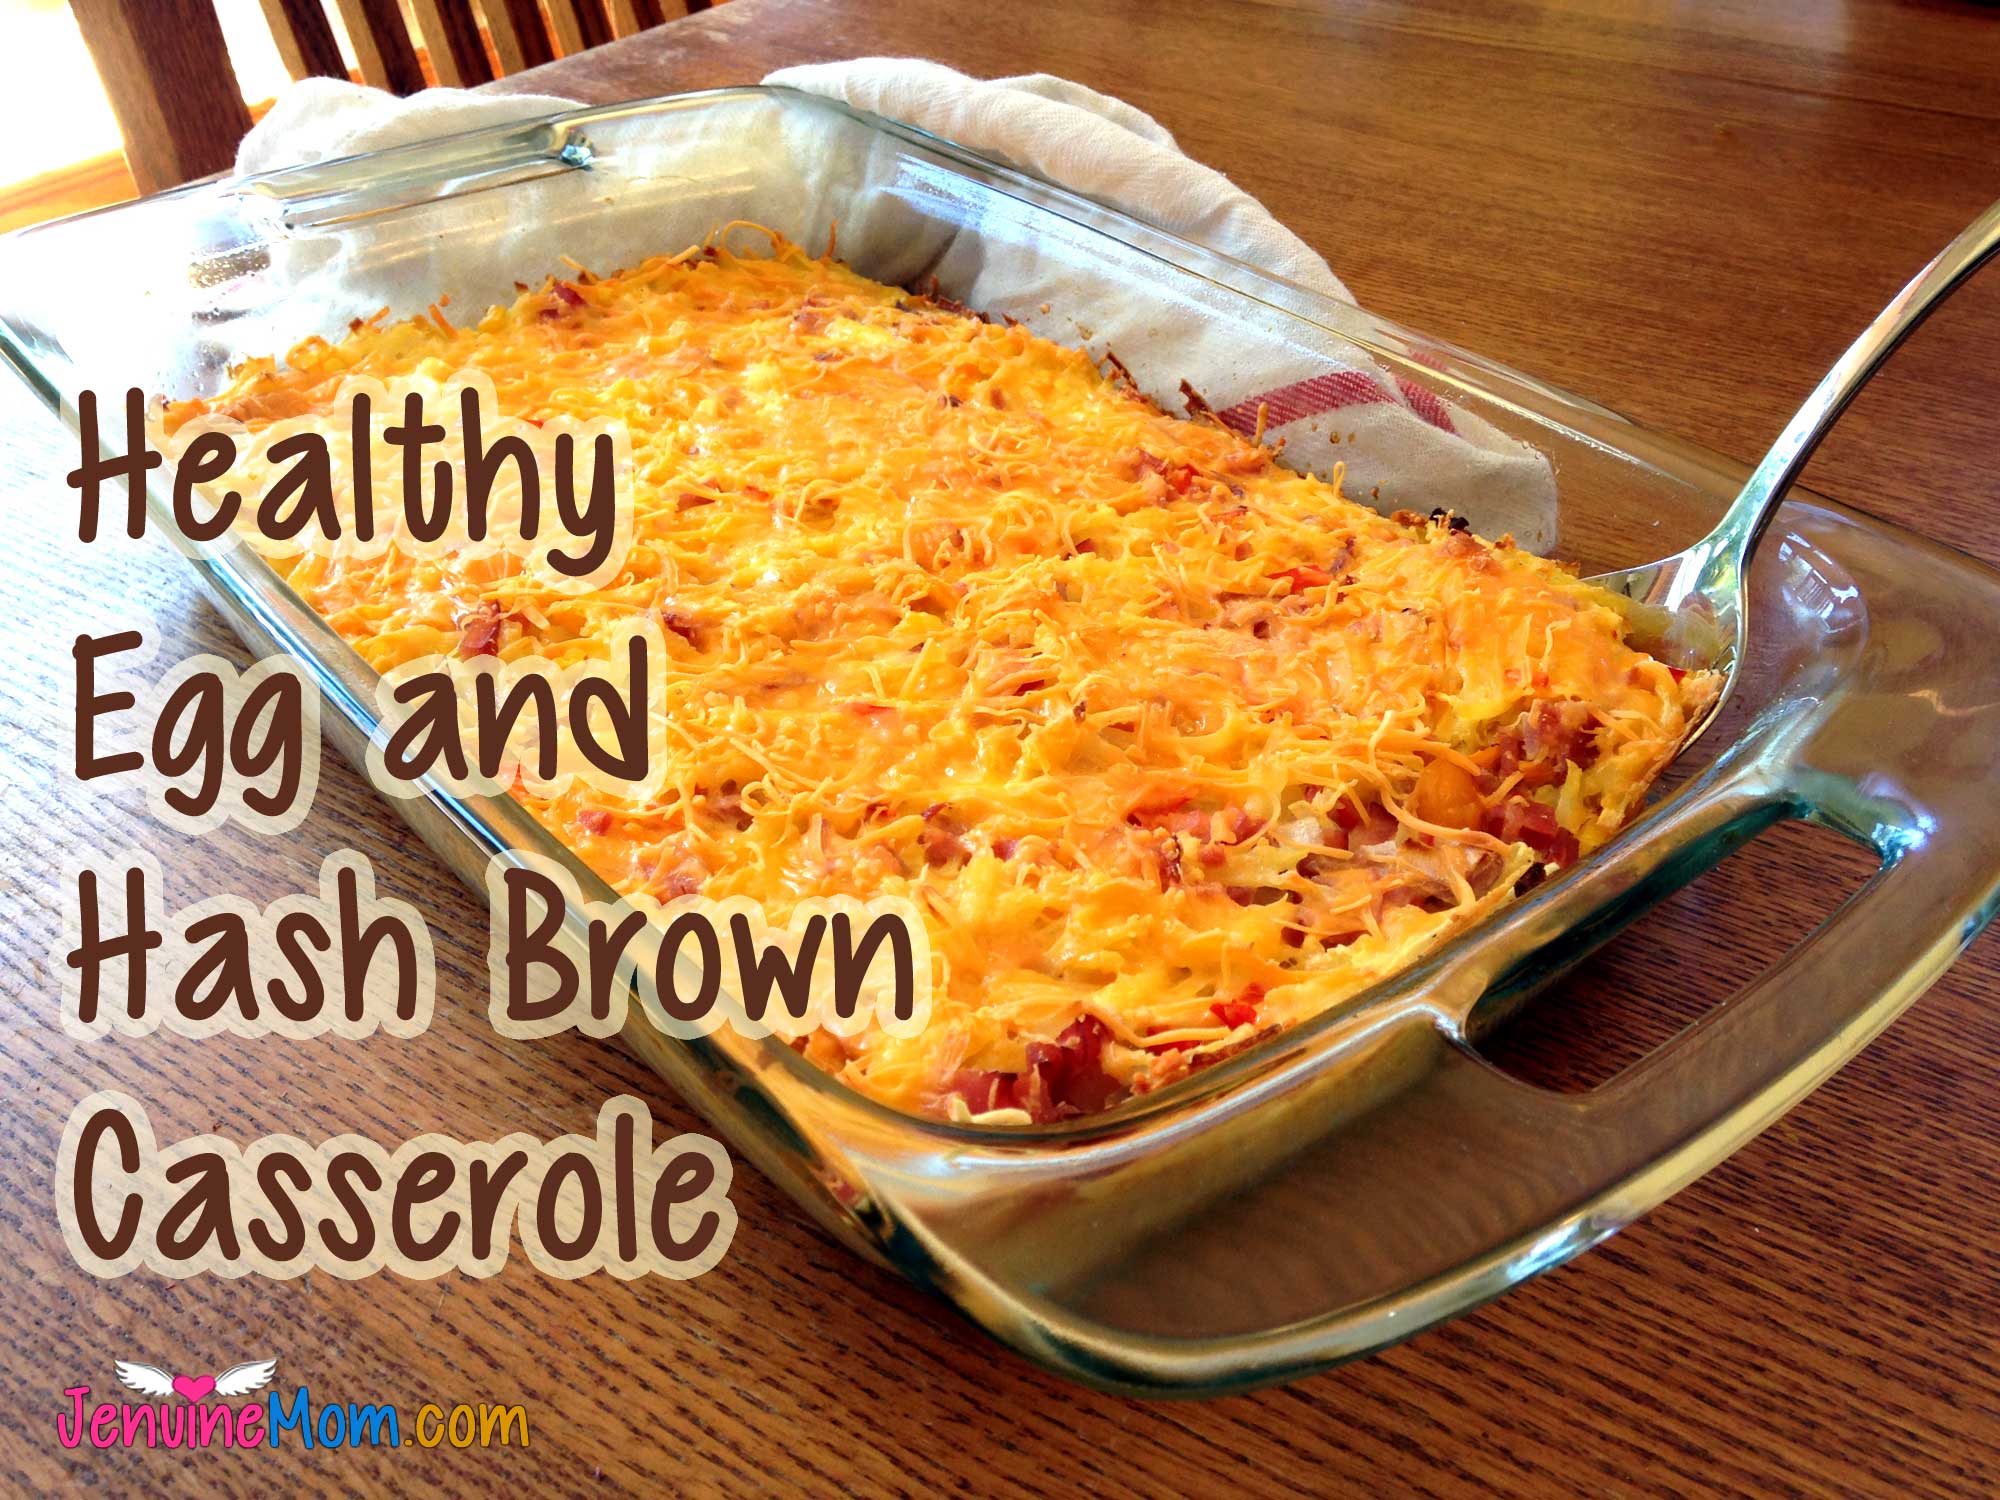 Breakfast Egg, Cheese, and Hash Brown Casserole: 100% Simply Filling Great Start to Your Day